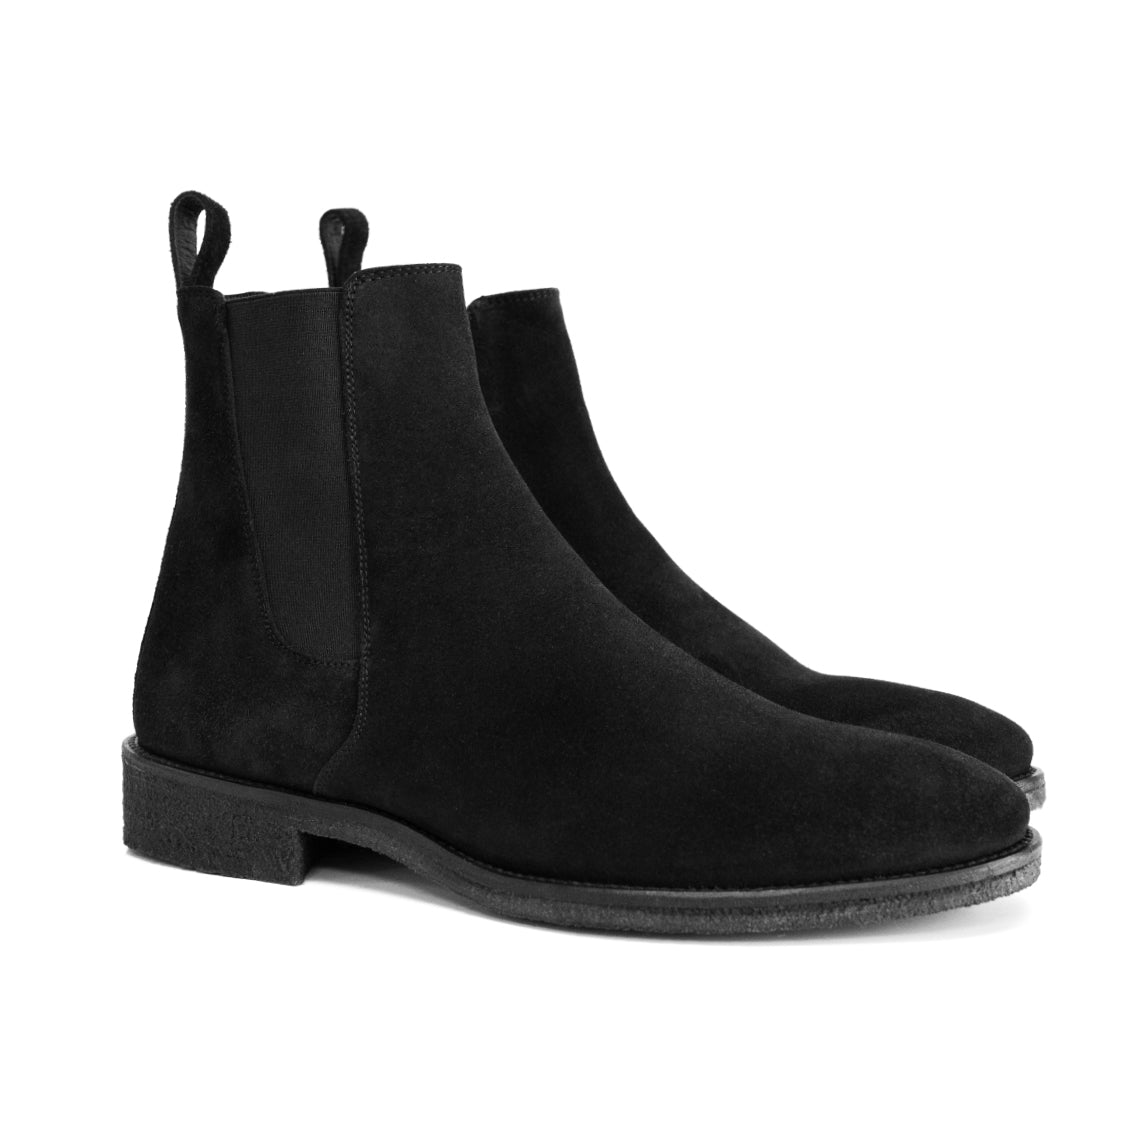 THE XAVIER CREPE CHELSEA BOOTS